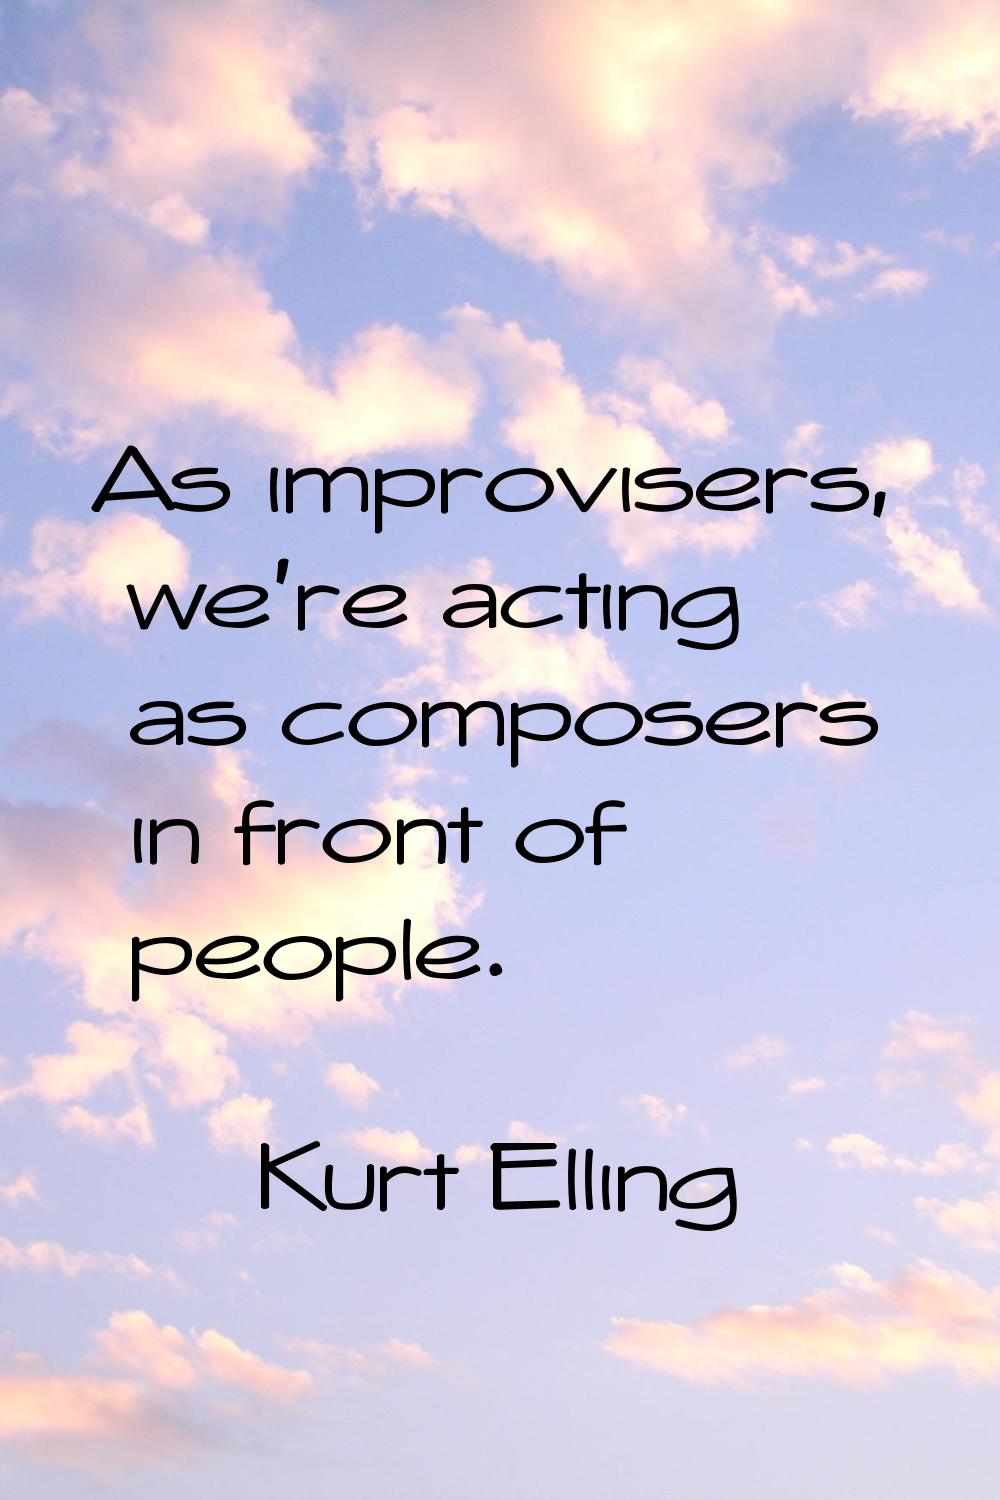 As improvisers, we're acting as composers in front of people.